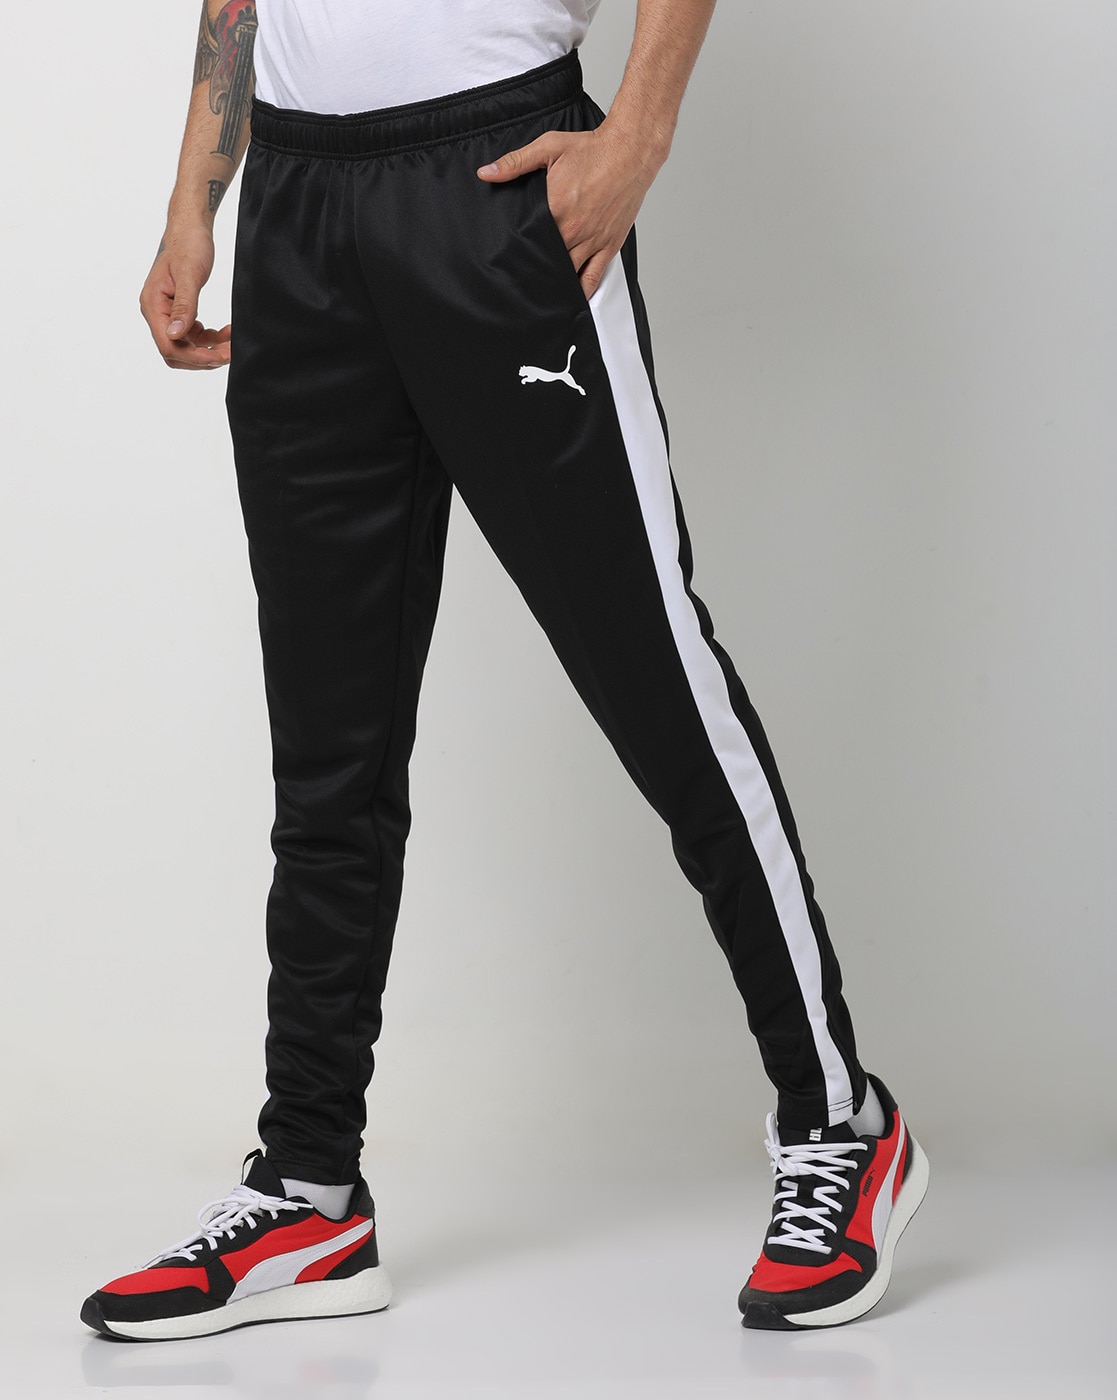 Buy Black Charcoal Track Pants for Men by PERFORMAX Online | Ajio.com